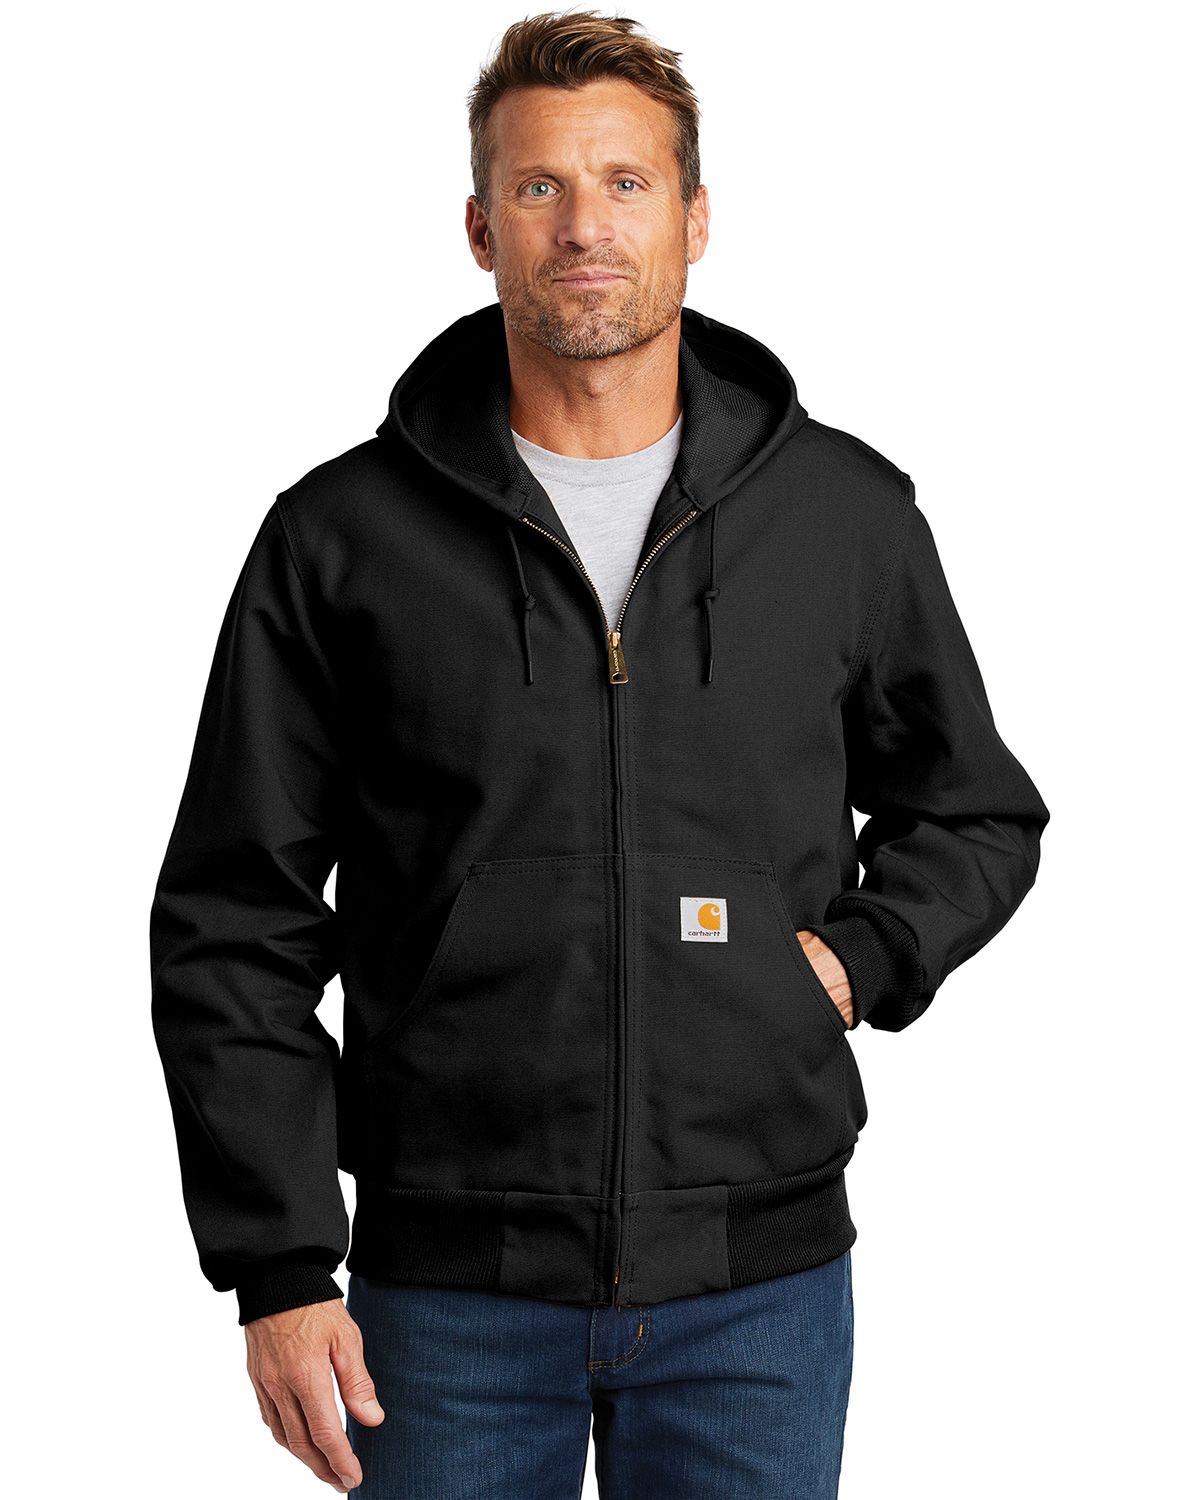 Carhartt CTTJ131 Tall Thermal-Lined Duck Active Jacket for Business ...